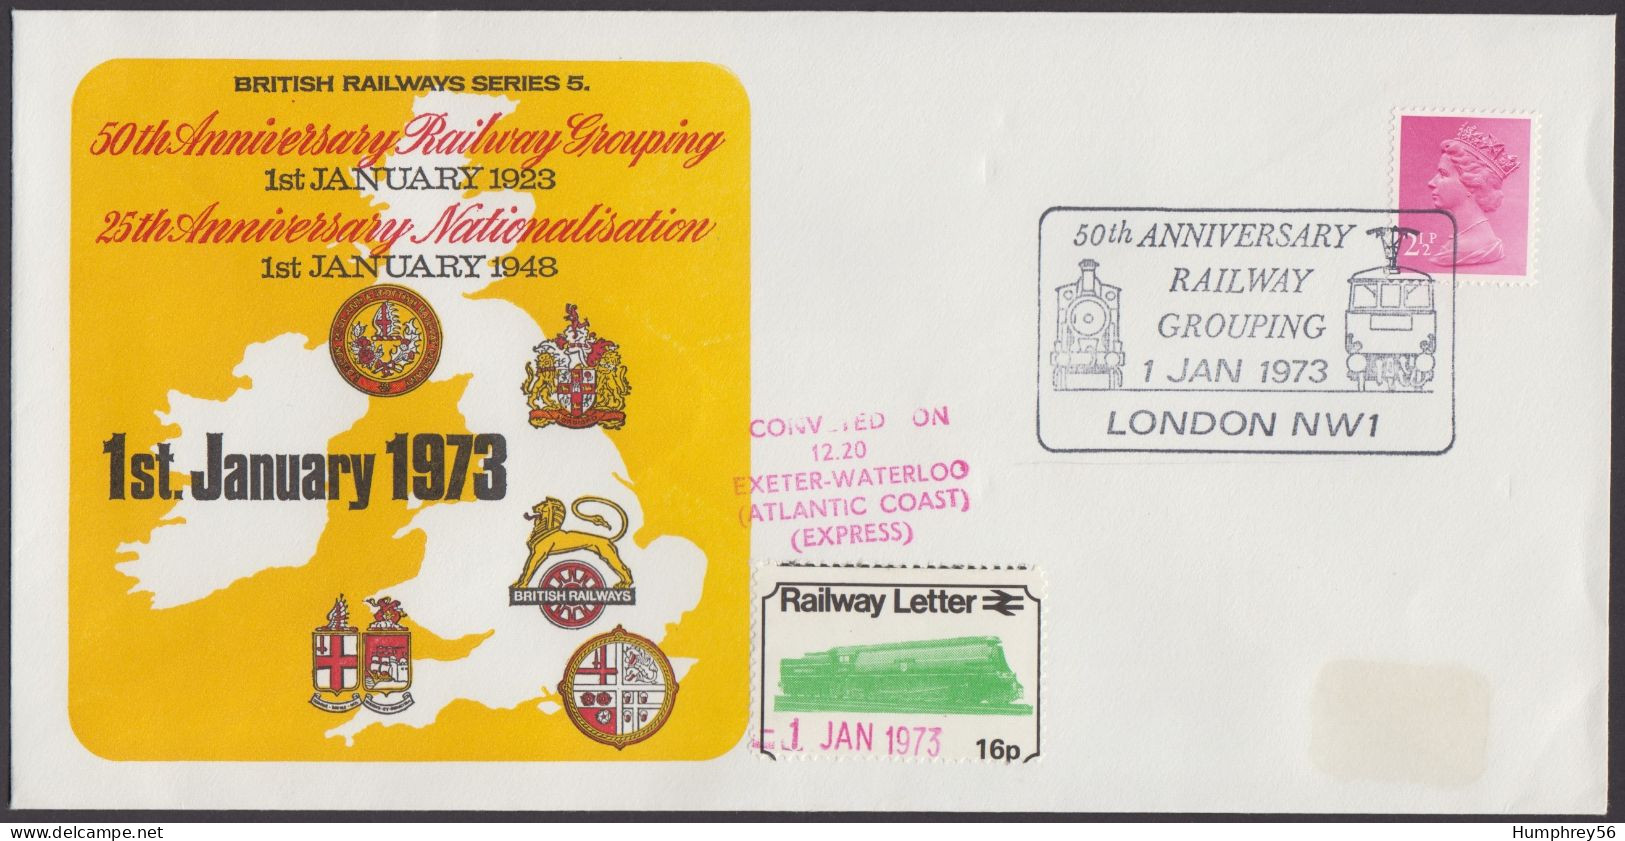 1973 - GREAT BRITAIN - Railway Covers - 50th Anniversary Railway Grouping + SG X851 [Queen Elizabeth] + LONDON NW1 - Ferrocarril & Paquetes Postales